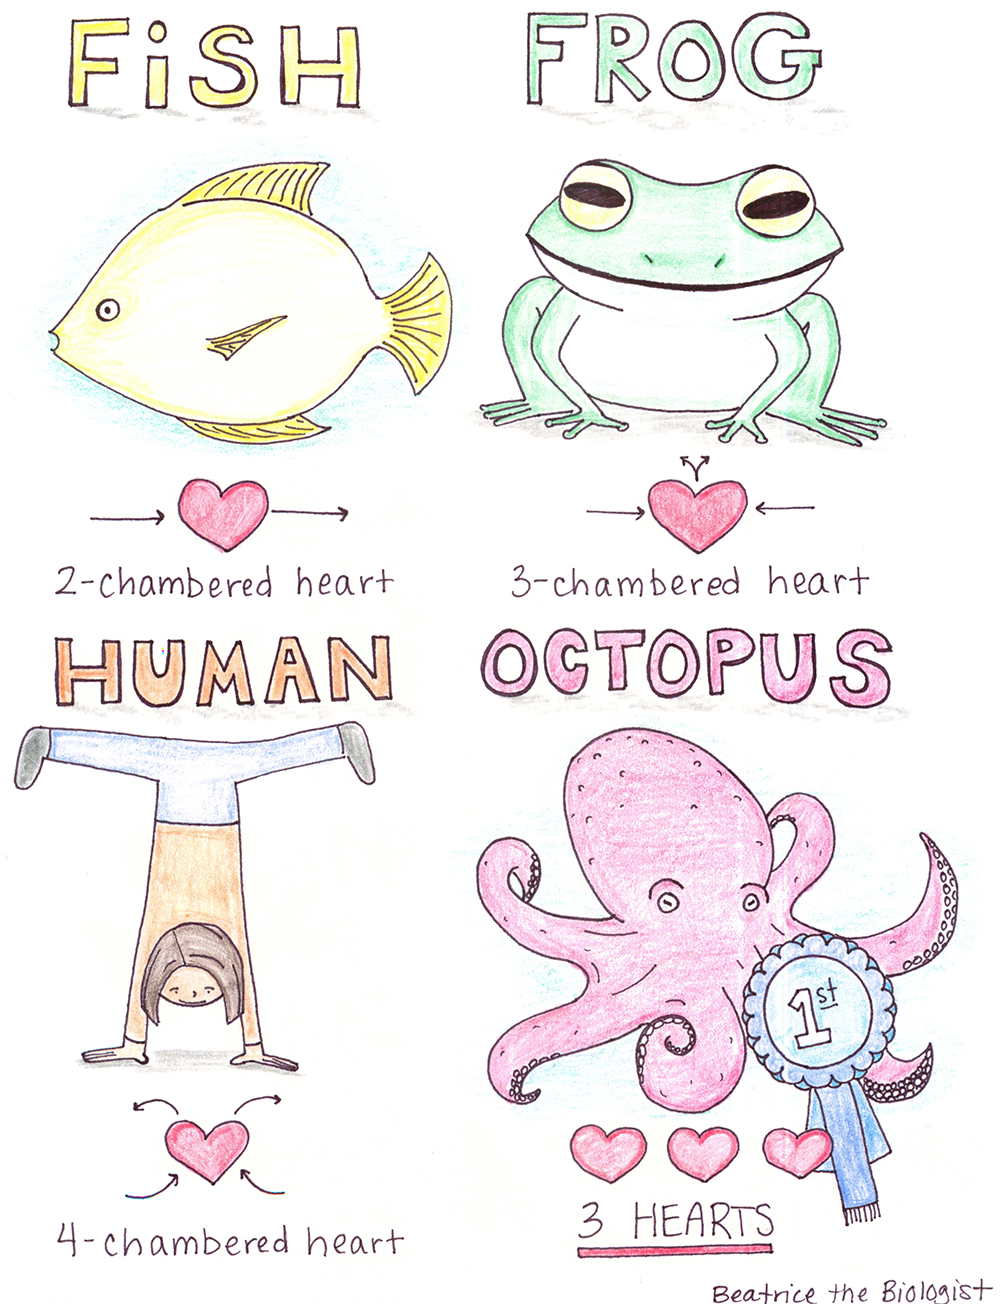 Heart Awards - Beatrice the Biologist